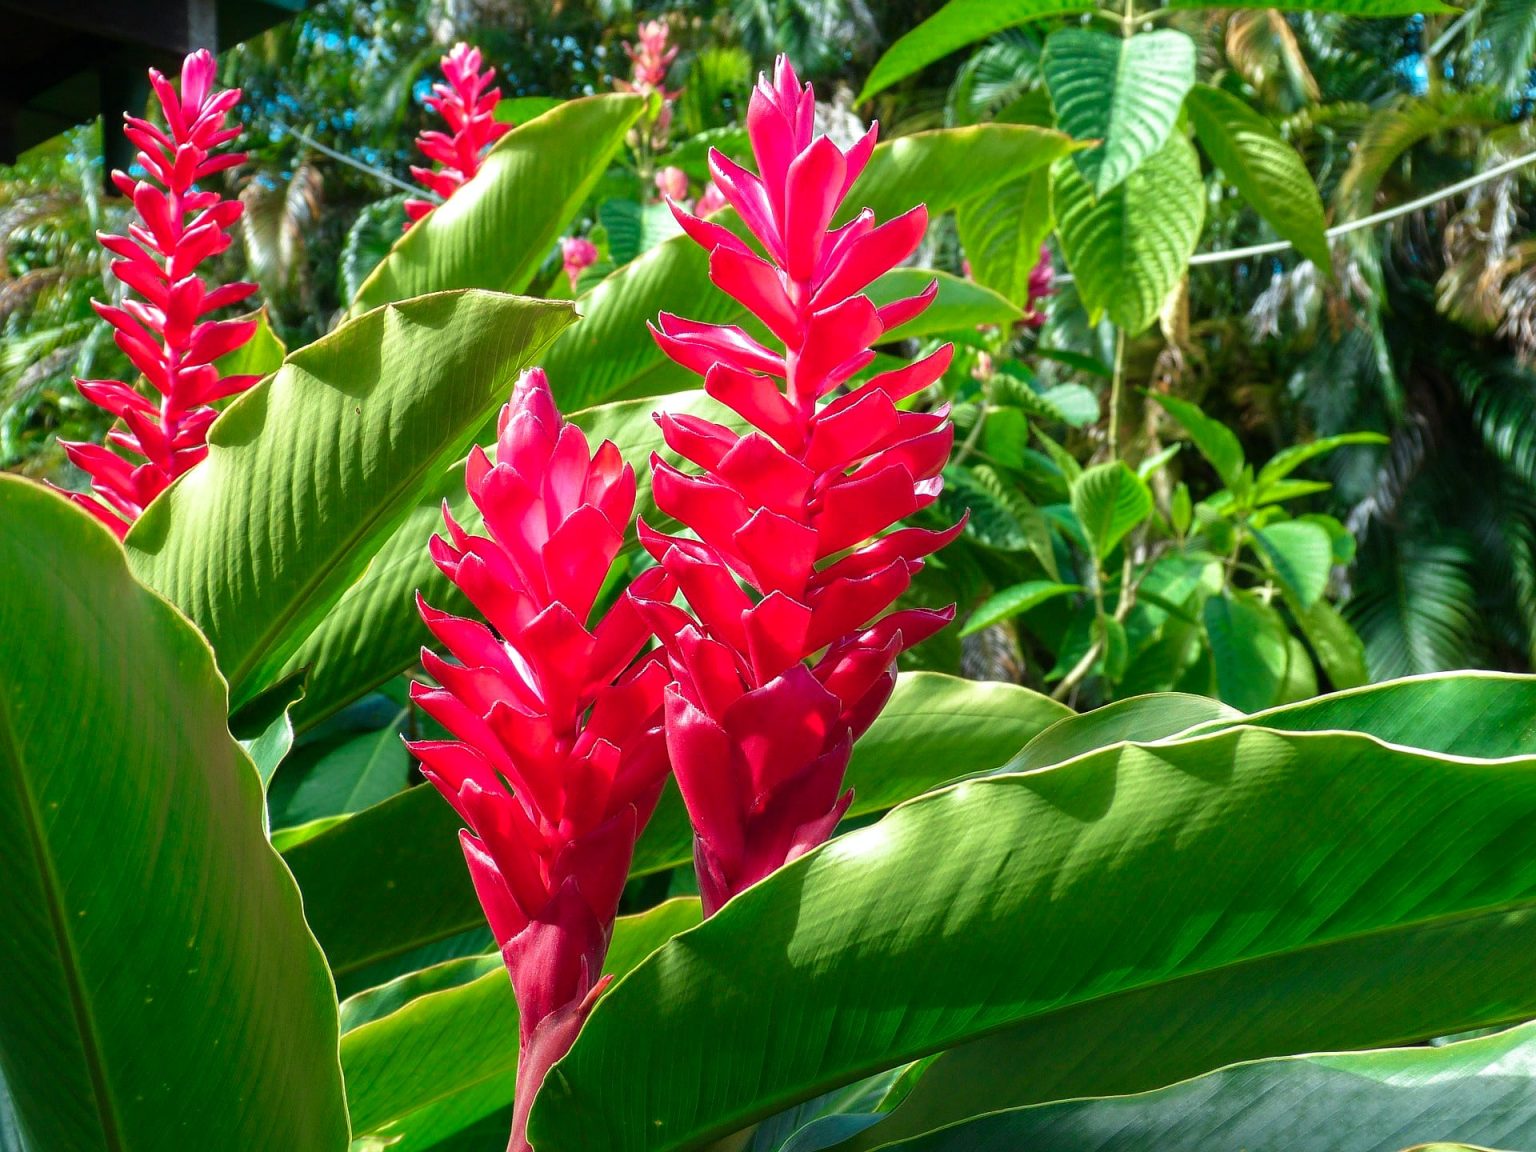 Gardening in Costa Rica: How to Landscape Your New Home